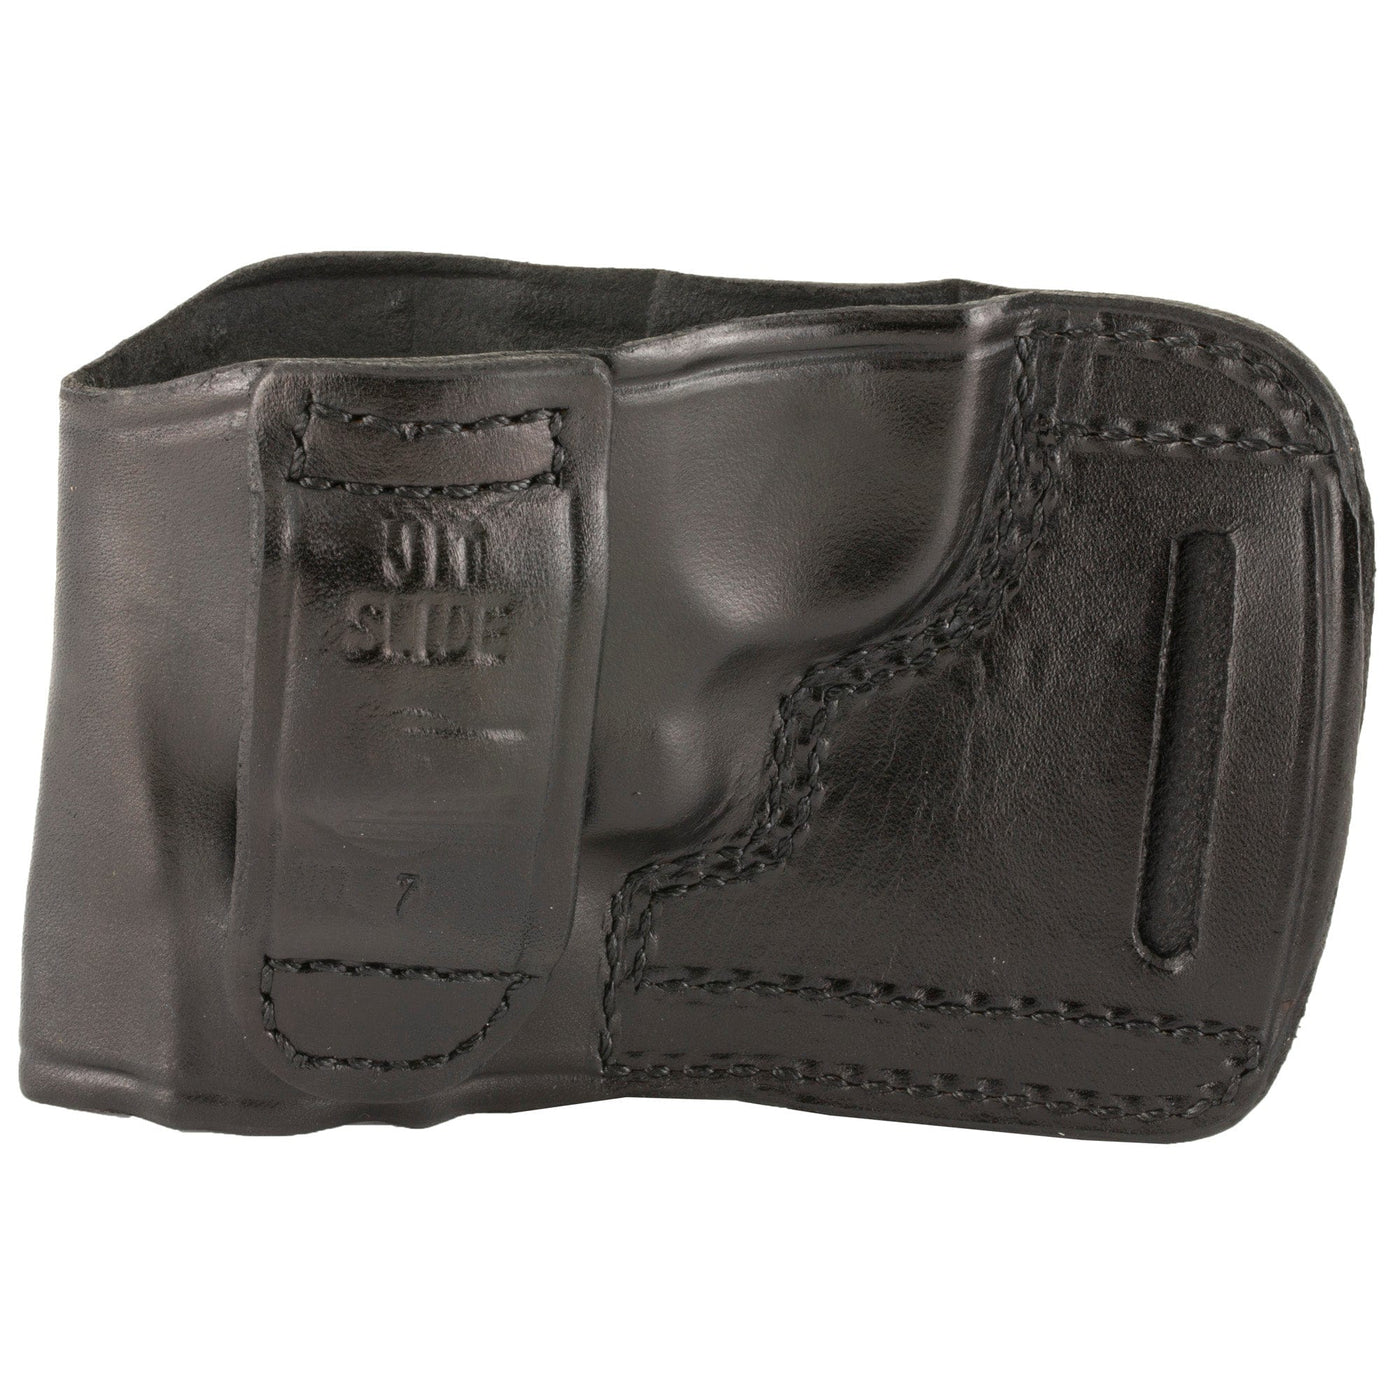 Don Hume D Hume Jit S&w L Frame Blk Rh Holsters